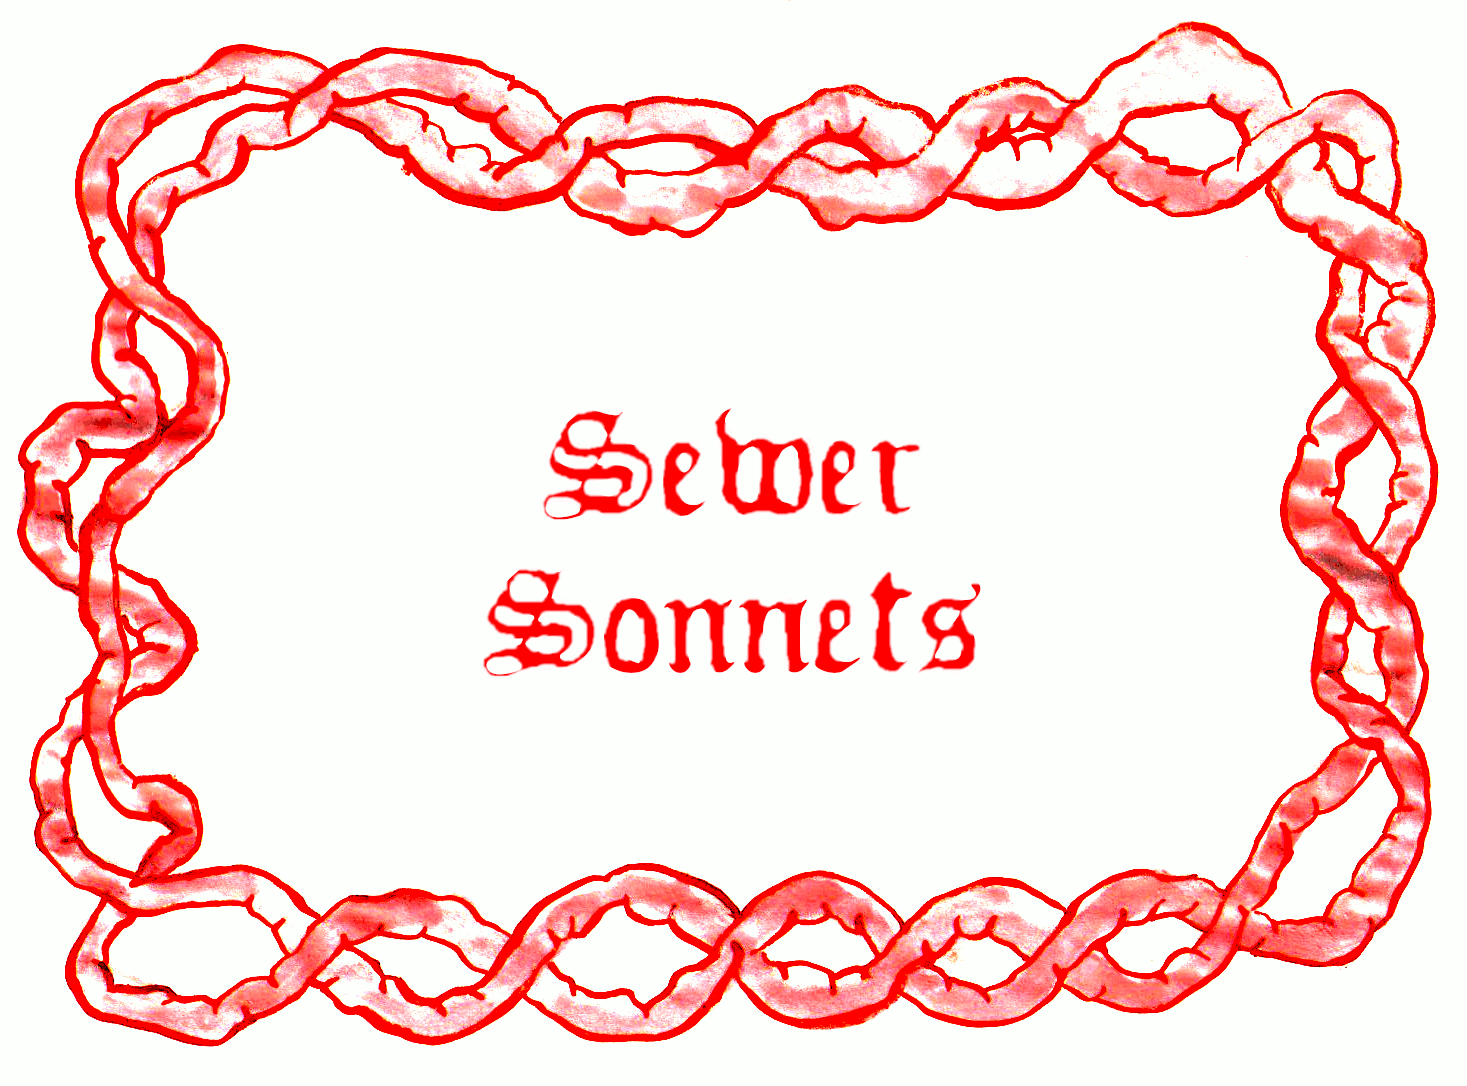 An jankily animated gif of a border of bright red intestines, entwined in a mock-Celtic Knot, in the centre of which are the words 'Sewer Sonnets' in a Medieval looking font called 'Old Europe', also in bright red and with a slight animation to them so they writhe around a little like worms.